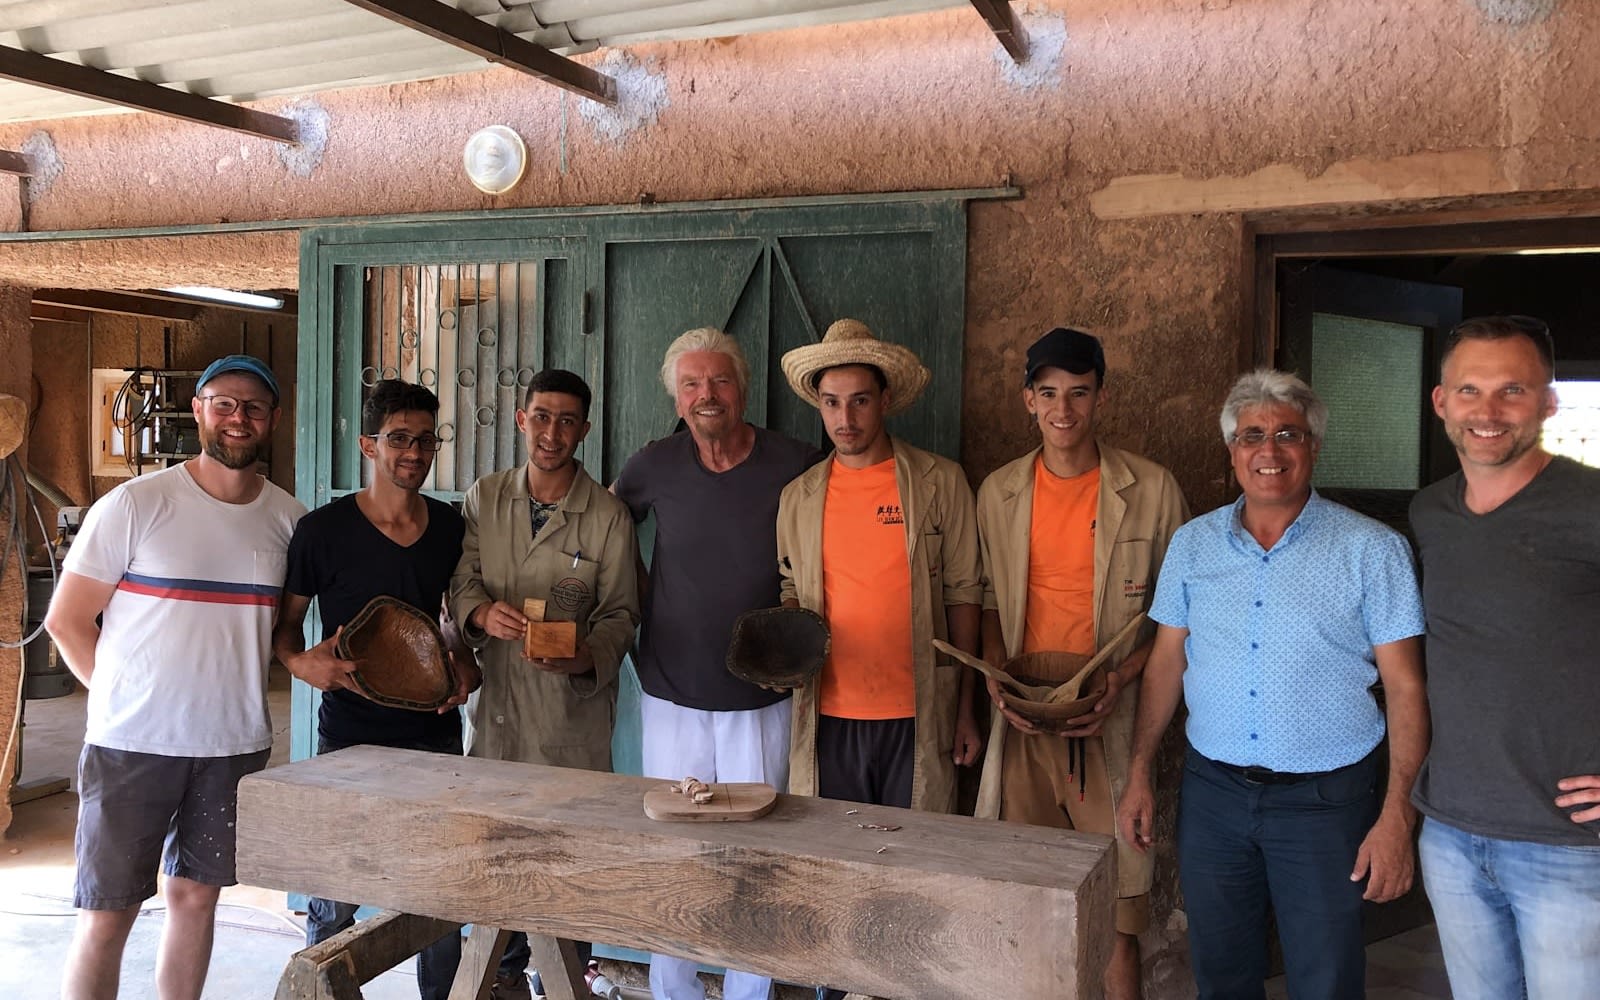 Richard Branson smiling and standing between a group of men from the Woodwork Centre